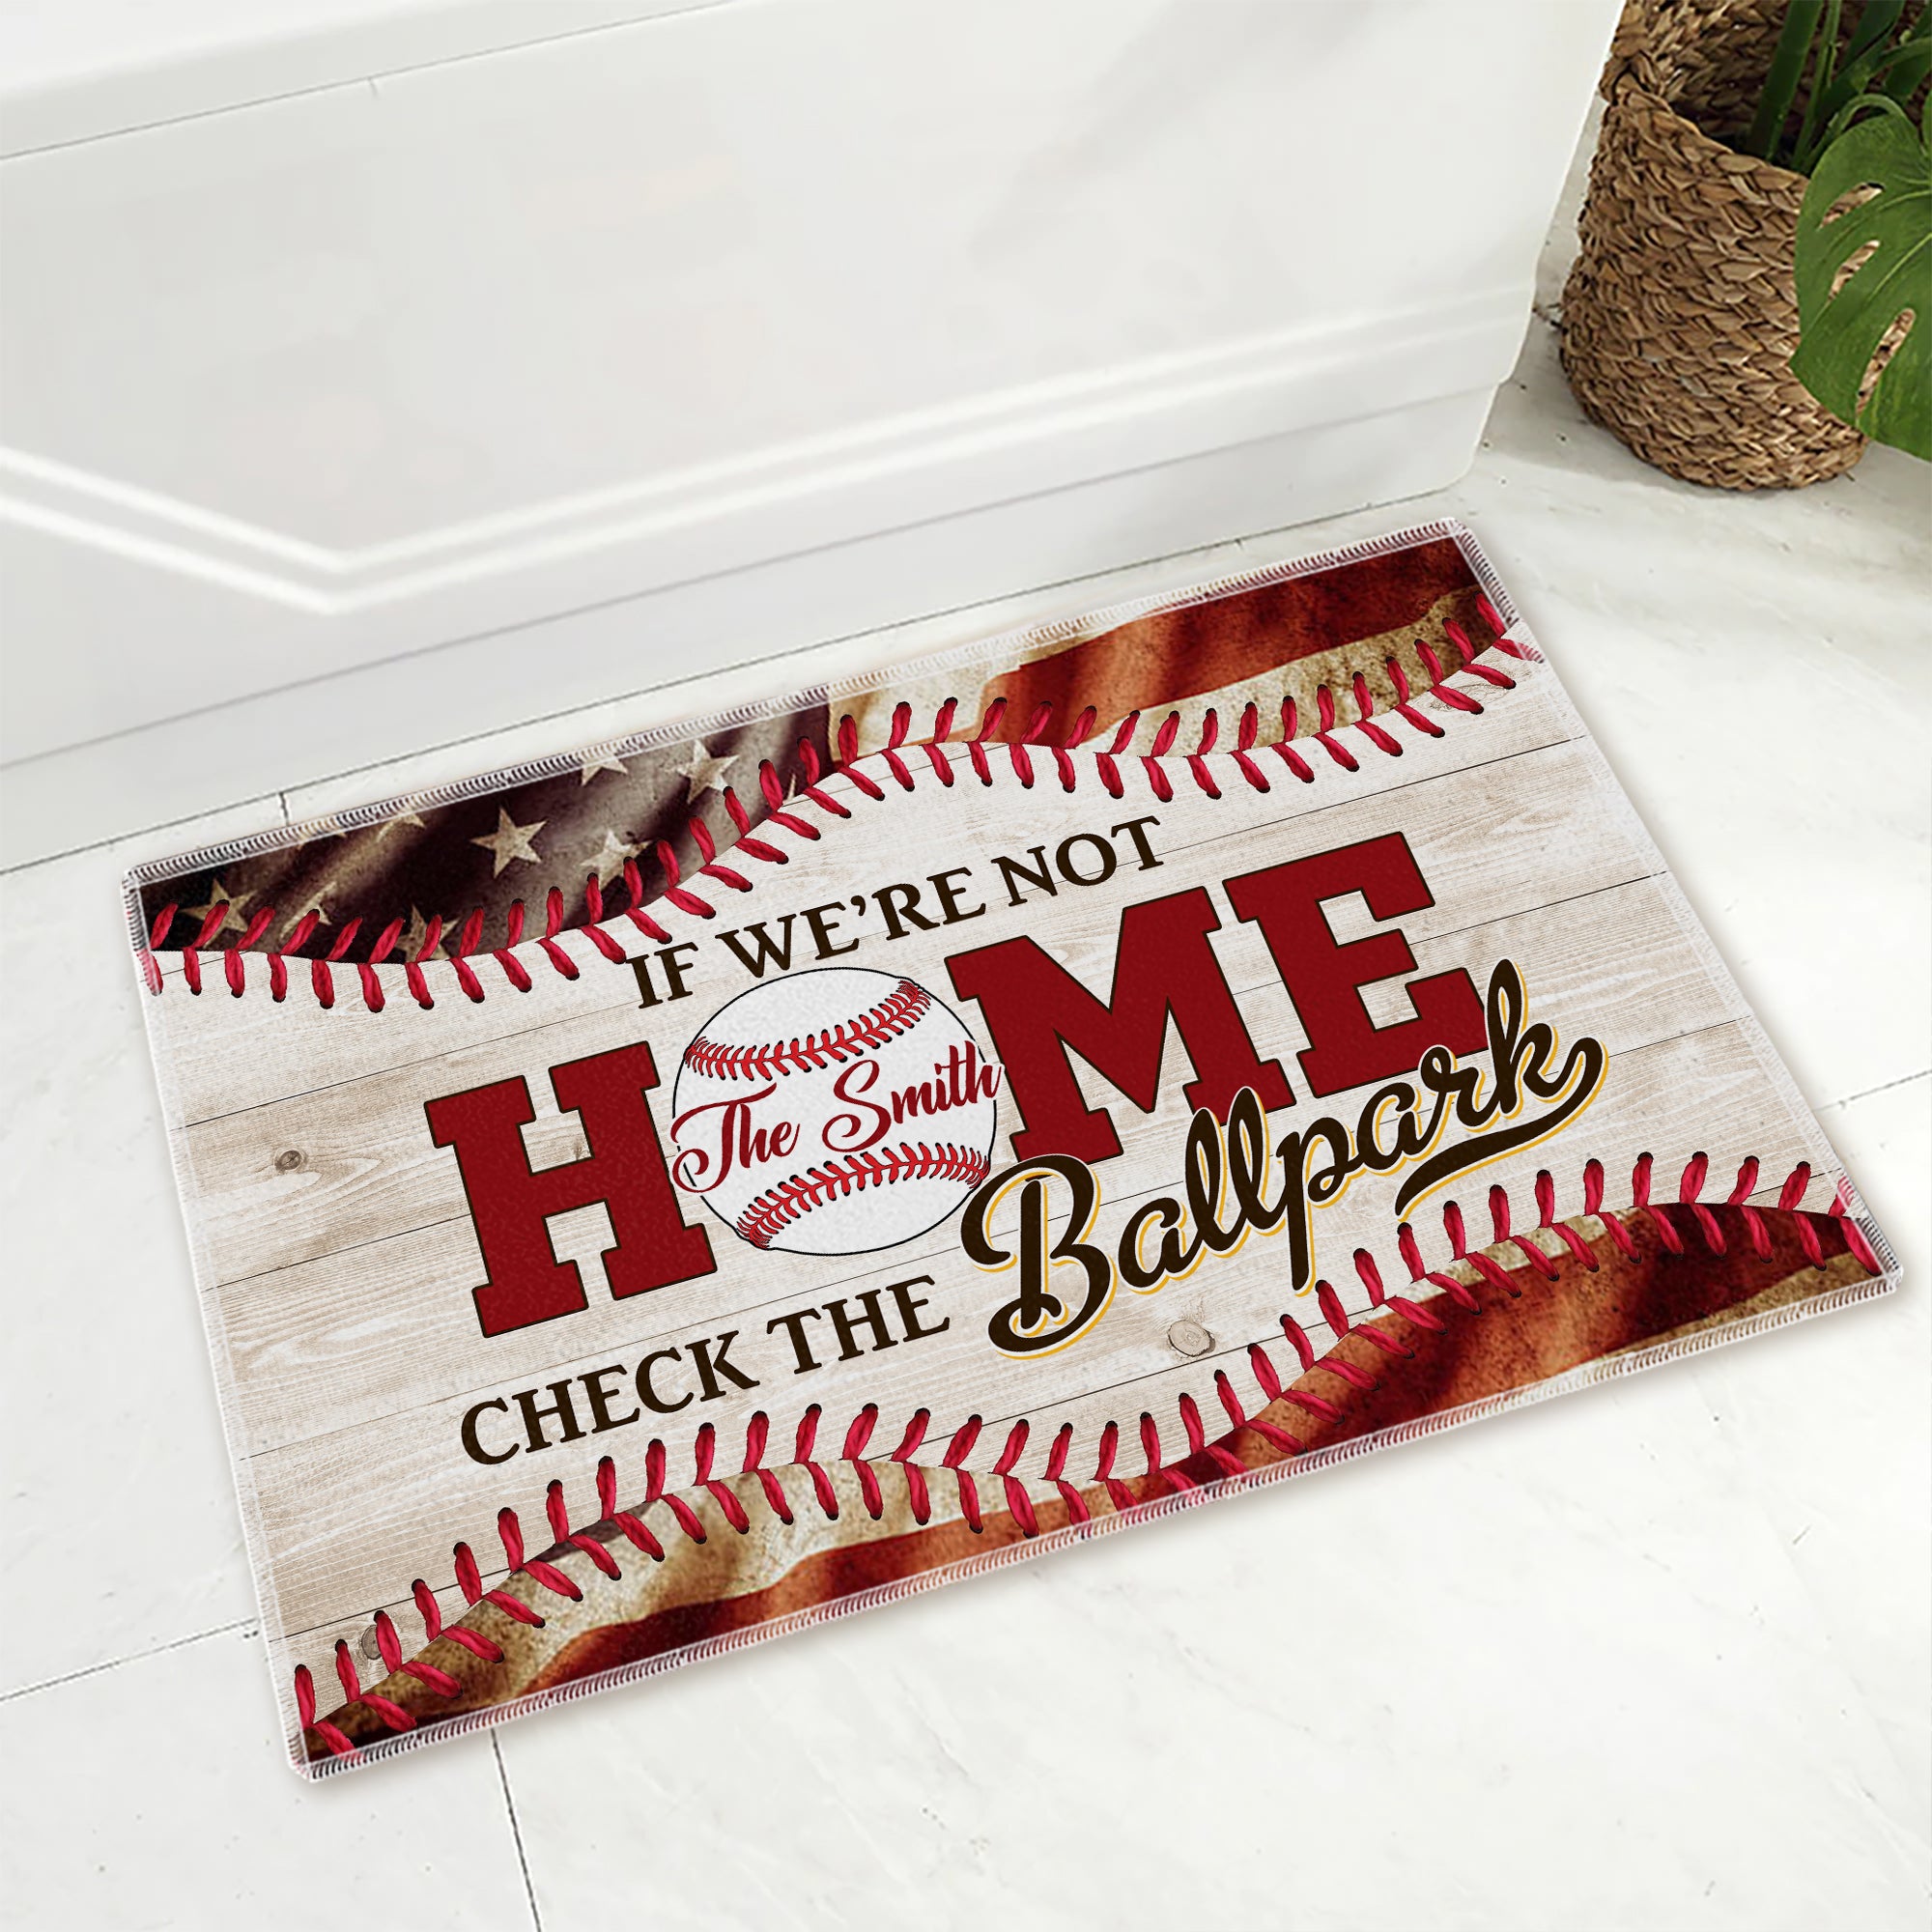 If We Are Not Home - Check The Ballpark, Personalized Baseball Doormat, Home Decor For Baseball Lovers